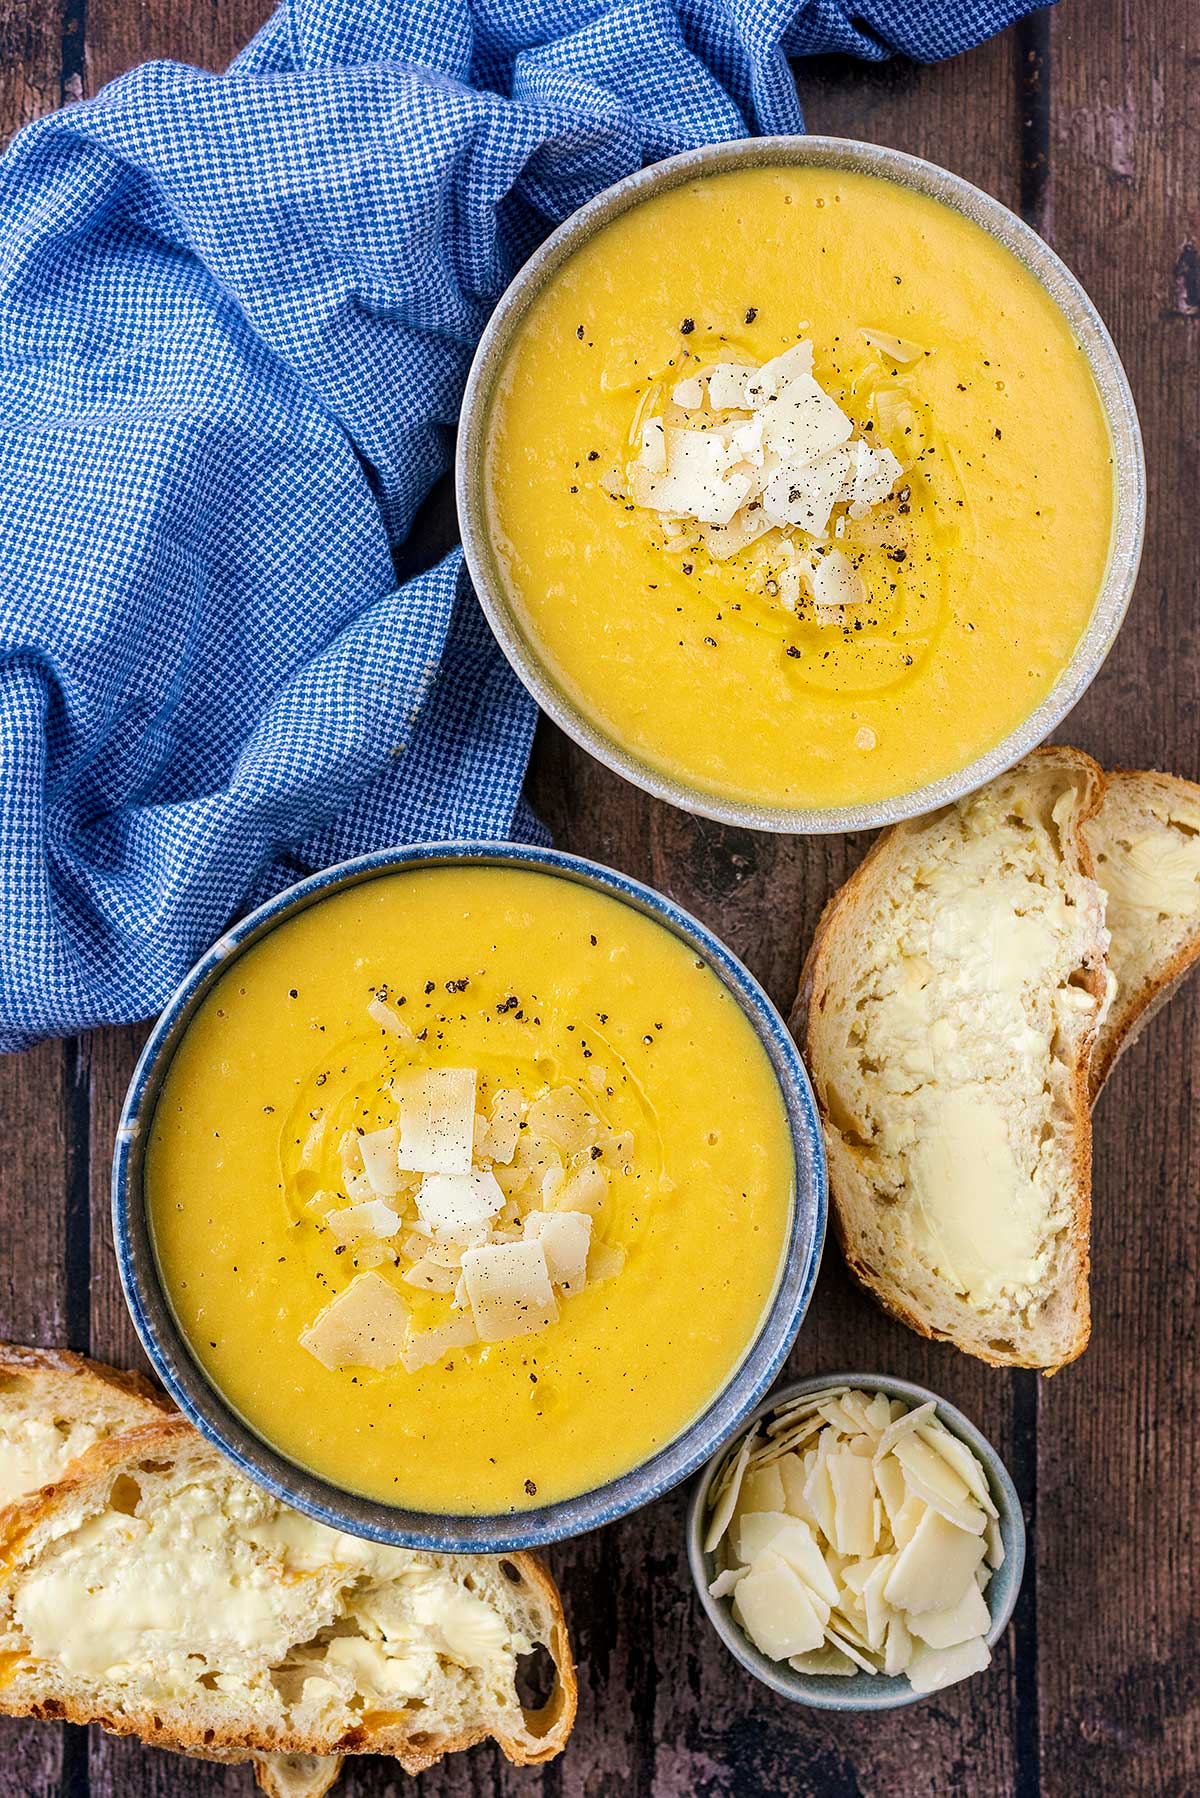 Two bowls of yellow coloured soup next to buttered bread and a small pot of Parmesan shavings.